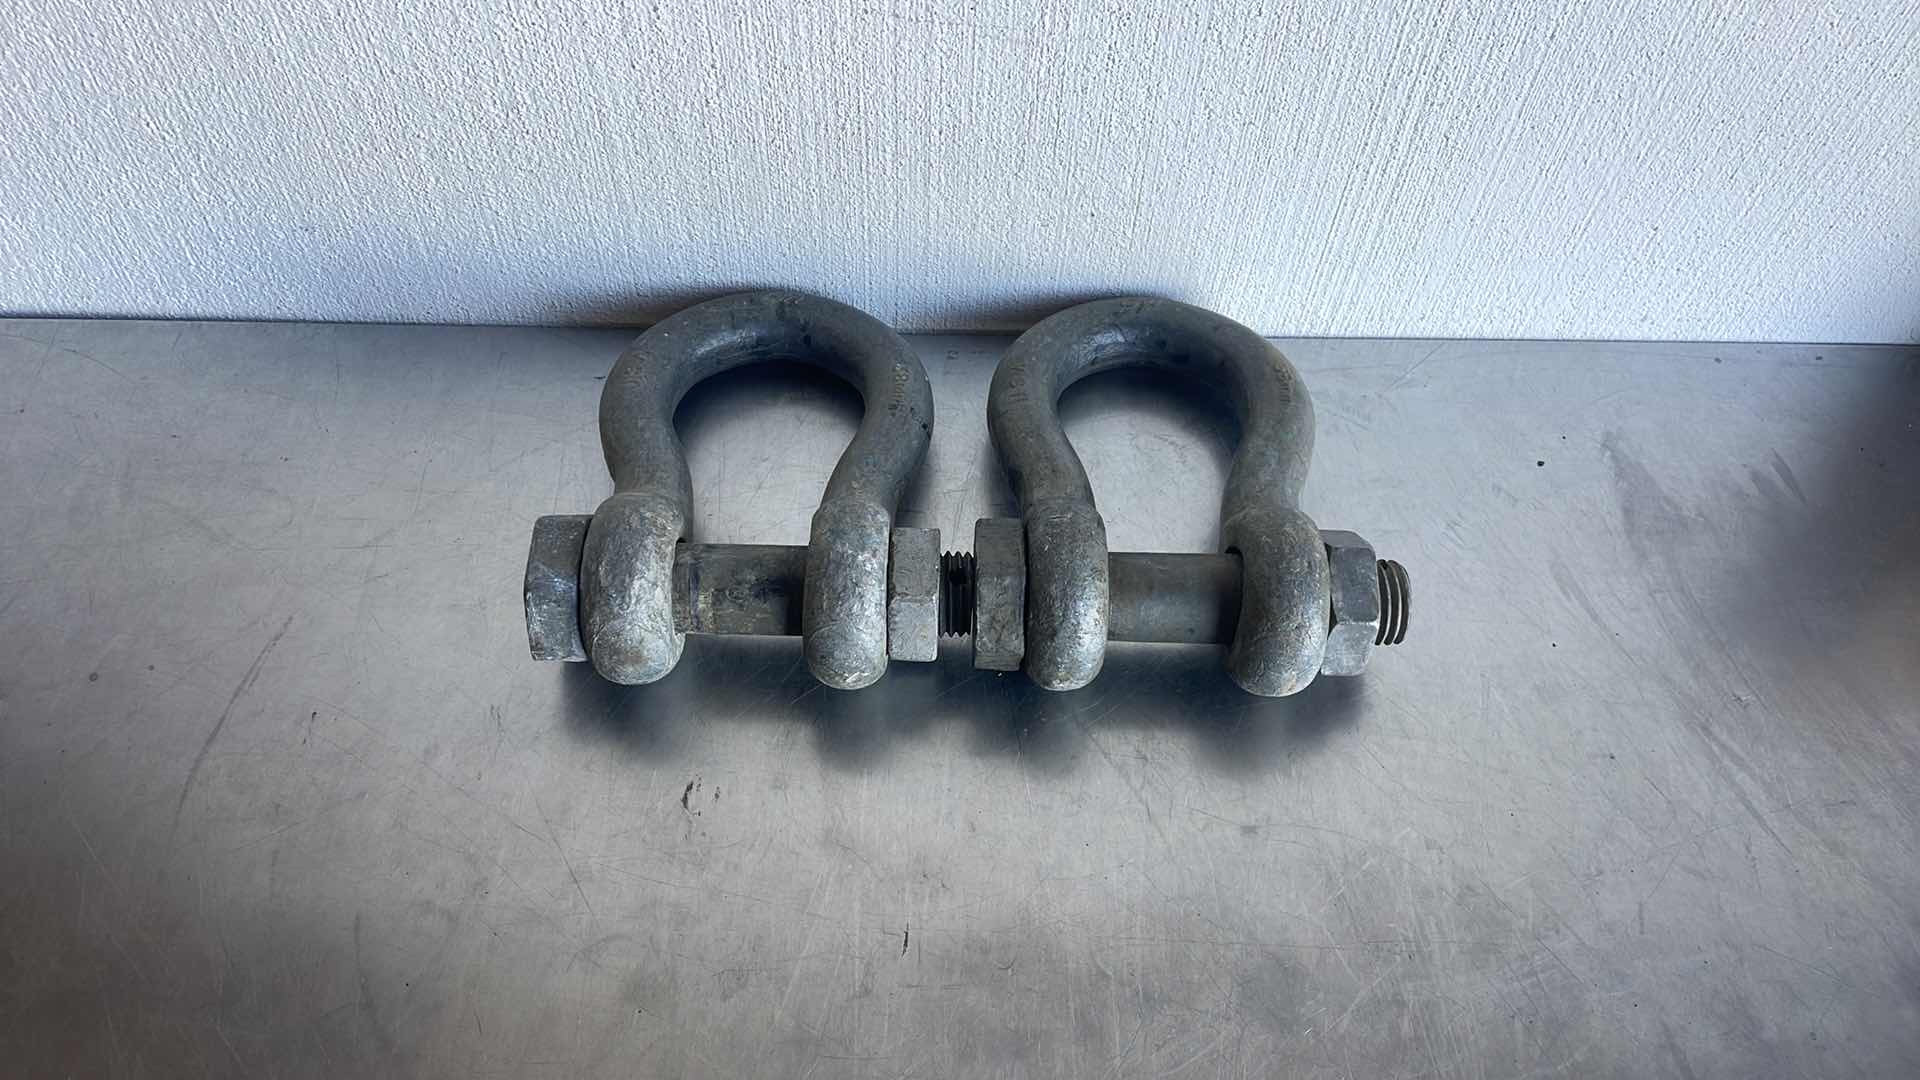 Photo 2 of CM 30 TON WLL 1-1/2” USA BOLT TYPE SHACKLES